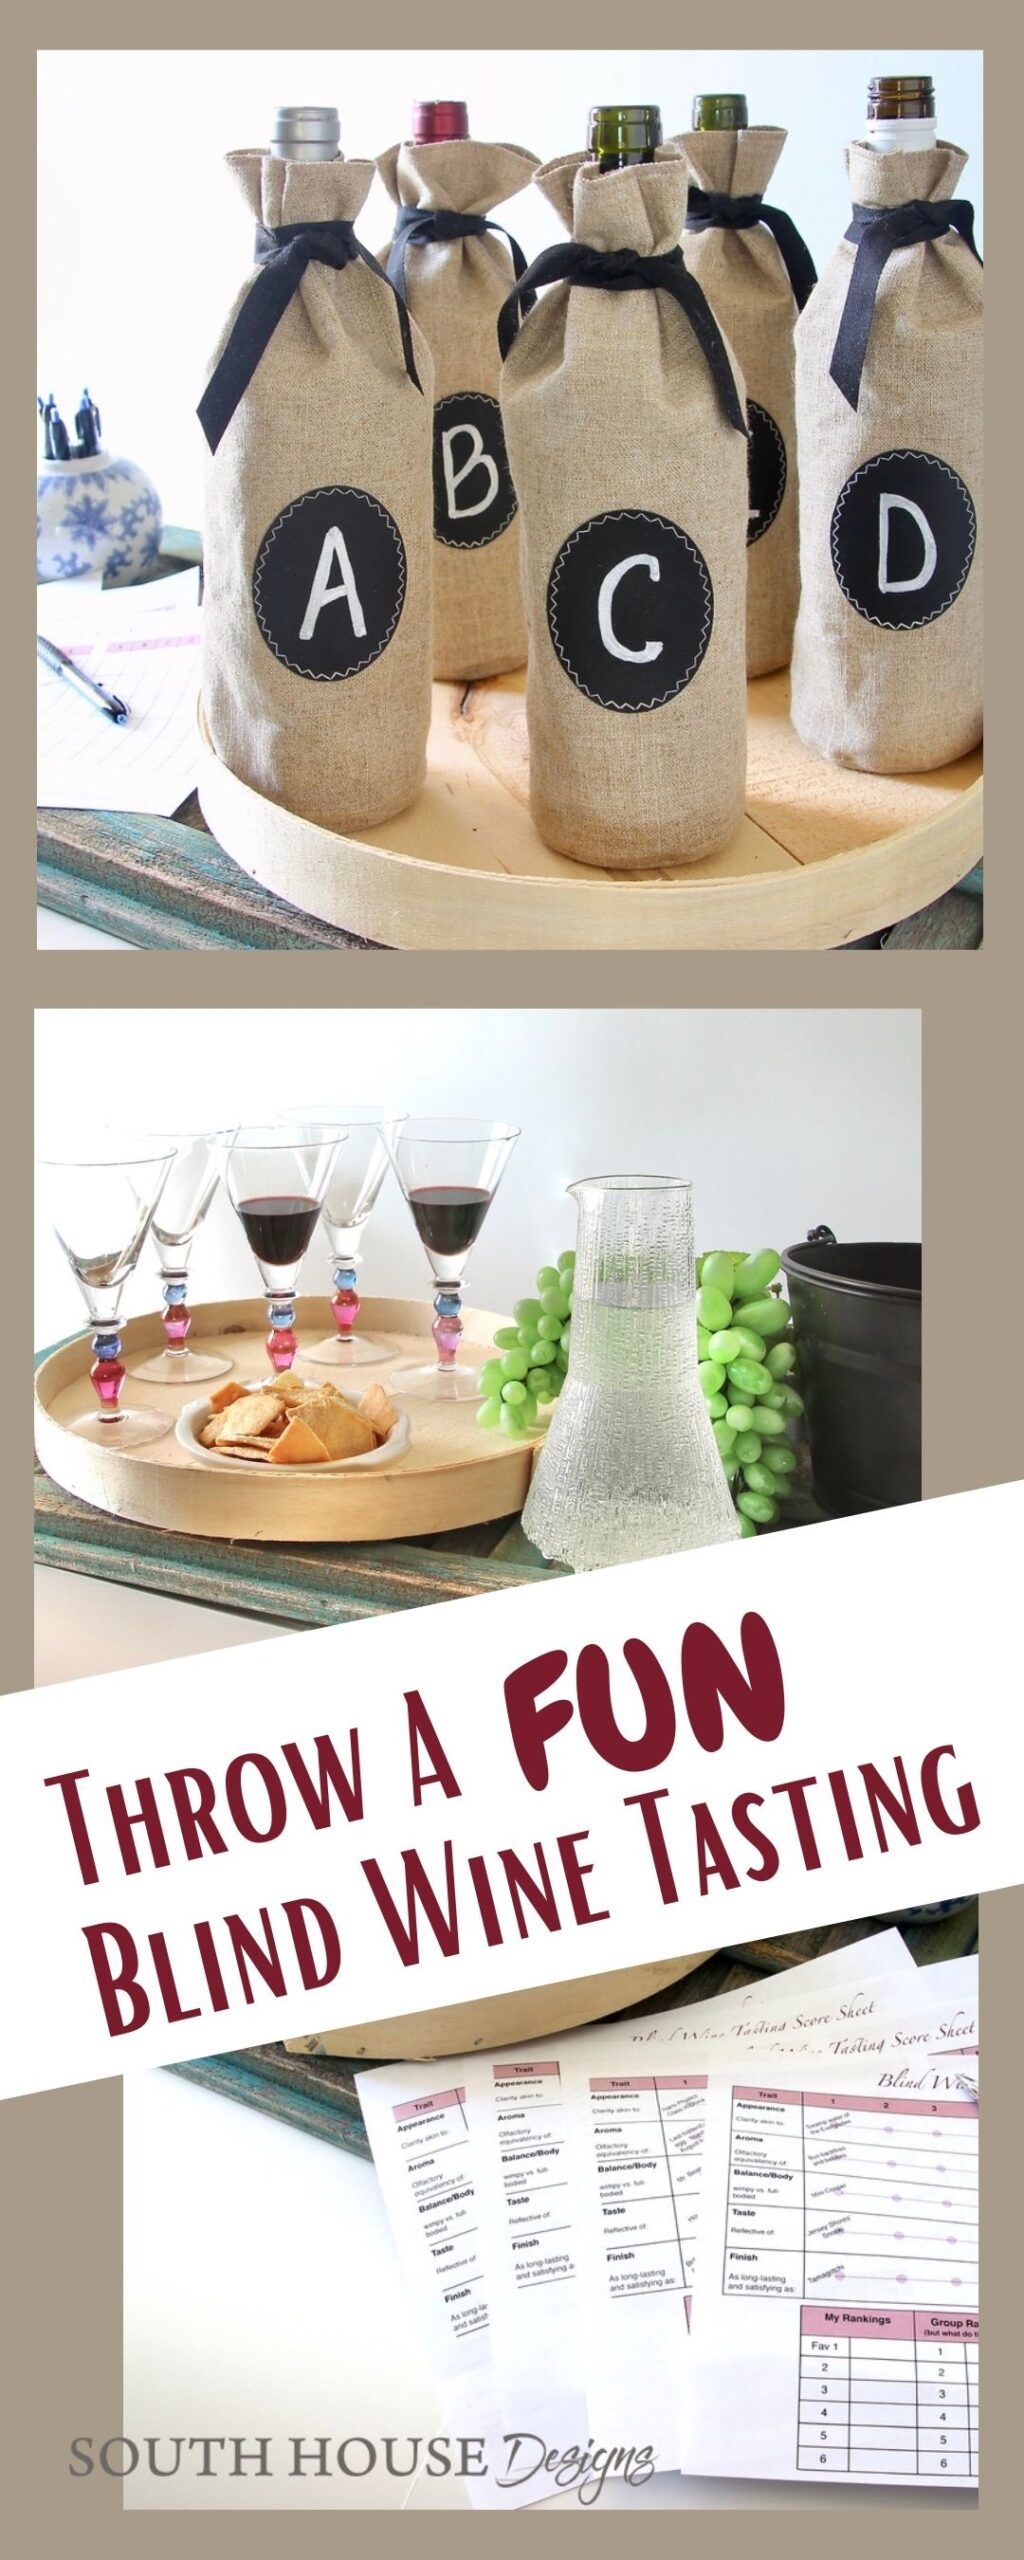 Pin with an image of bagged wine bottle on tray above a wine tasting party set up over an image of wine tasting scorecards